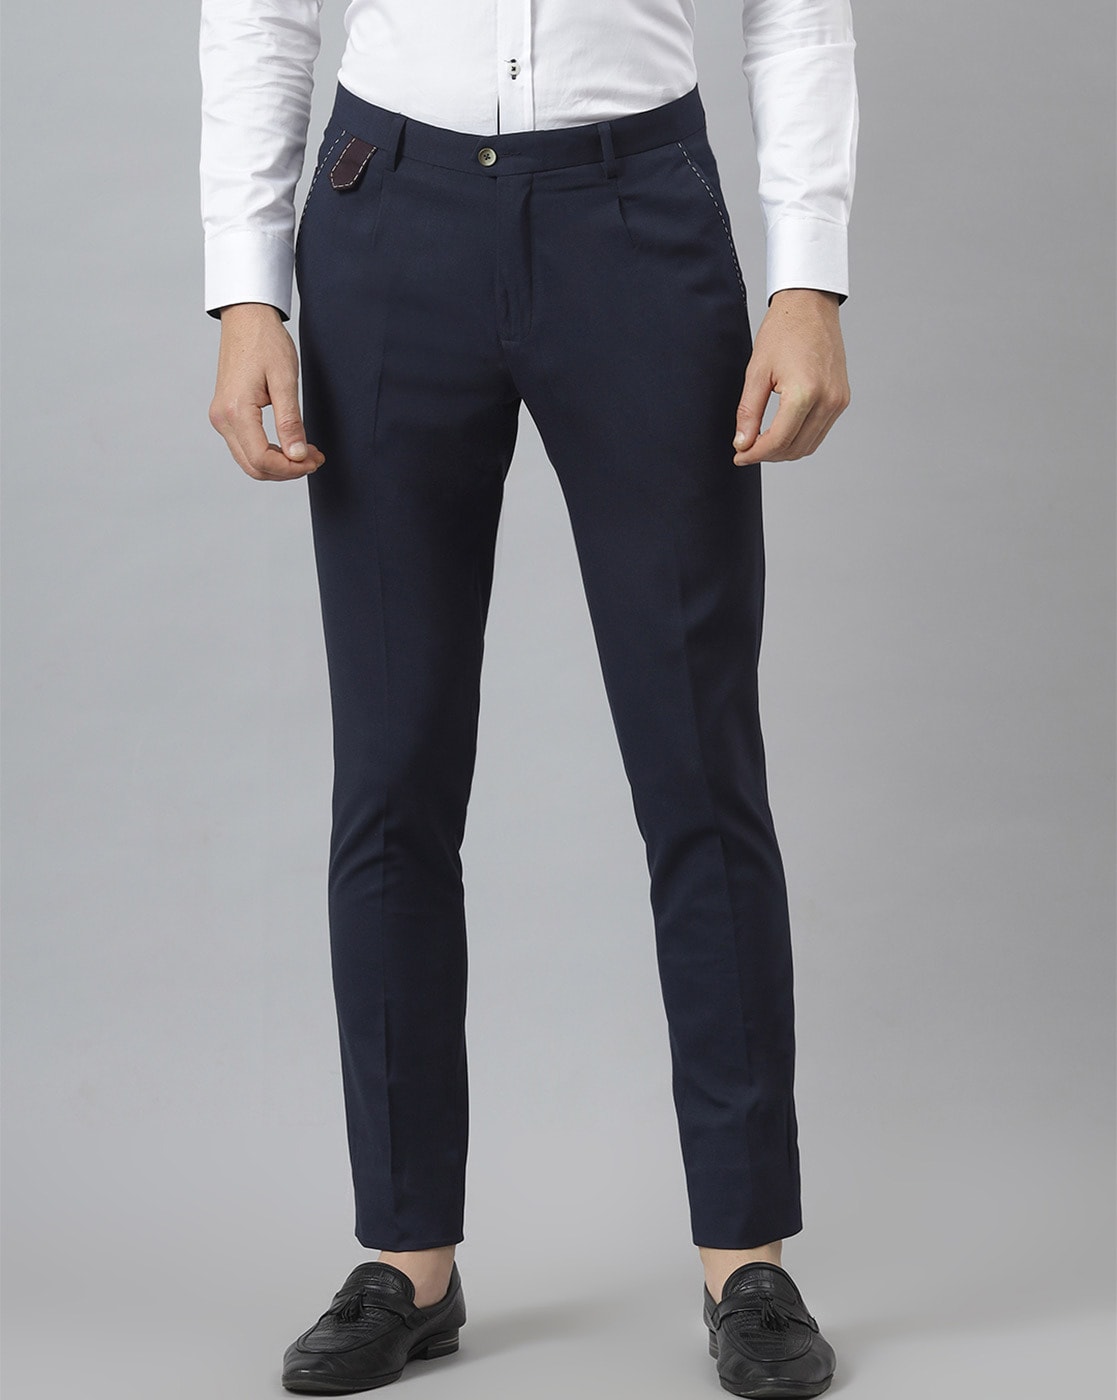 Discover Qarot Men's Latest Collection of Ankle Length Trousers